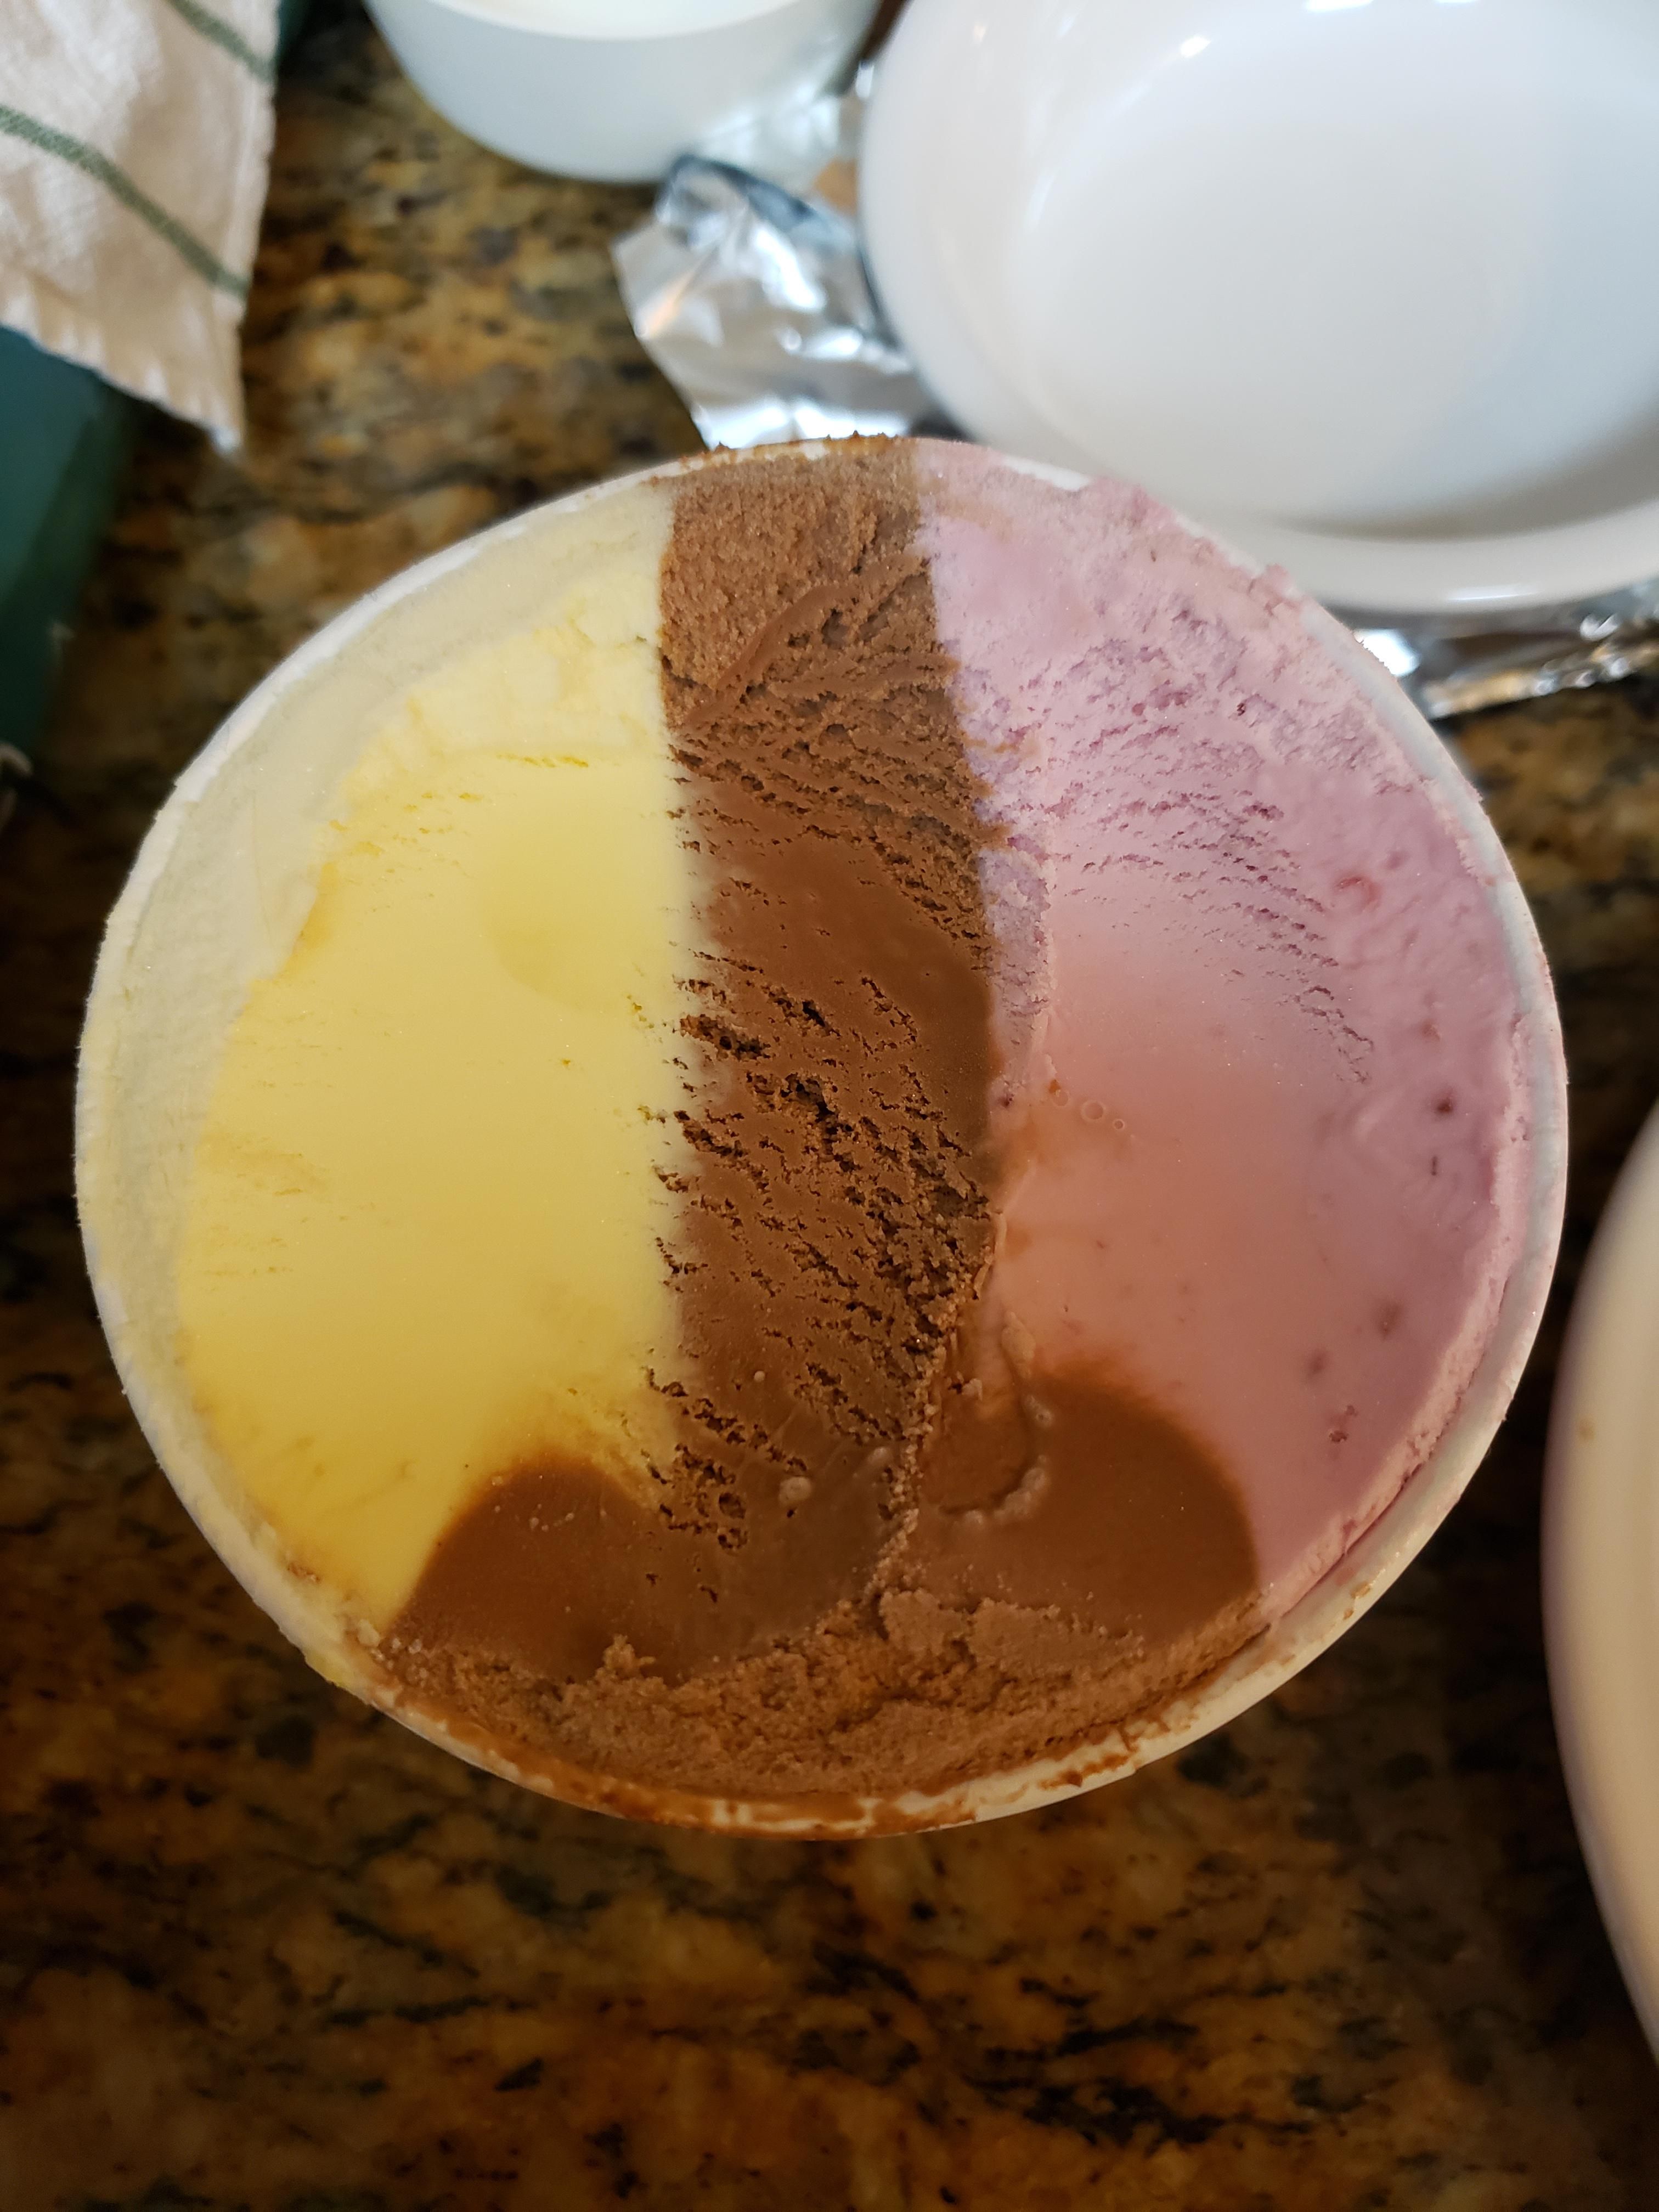 My ice cream was happy to see me